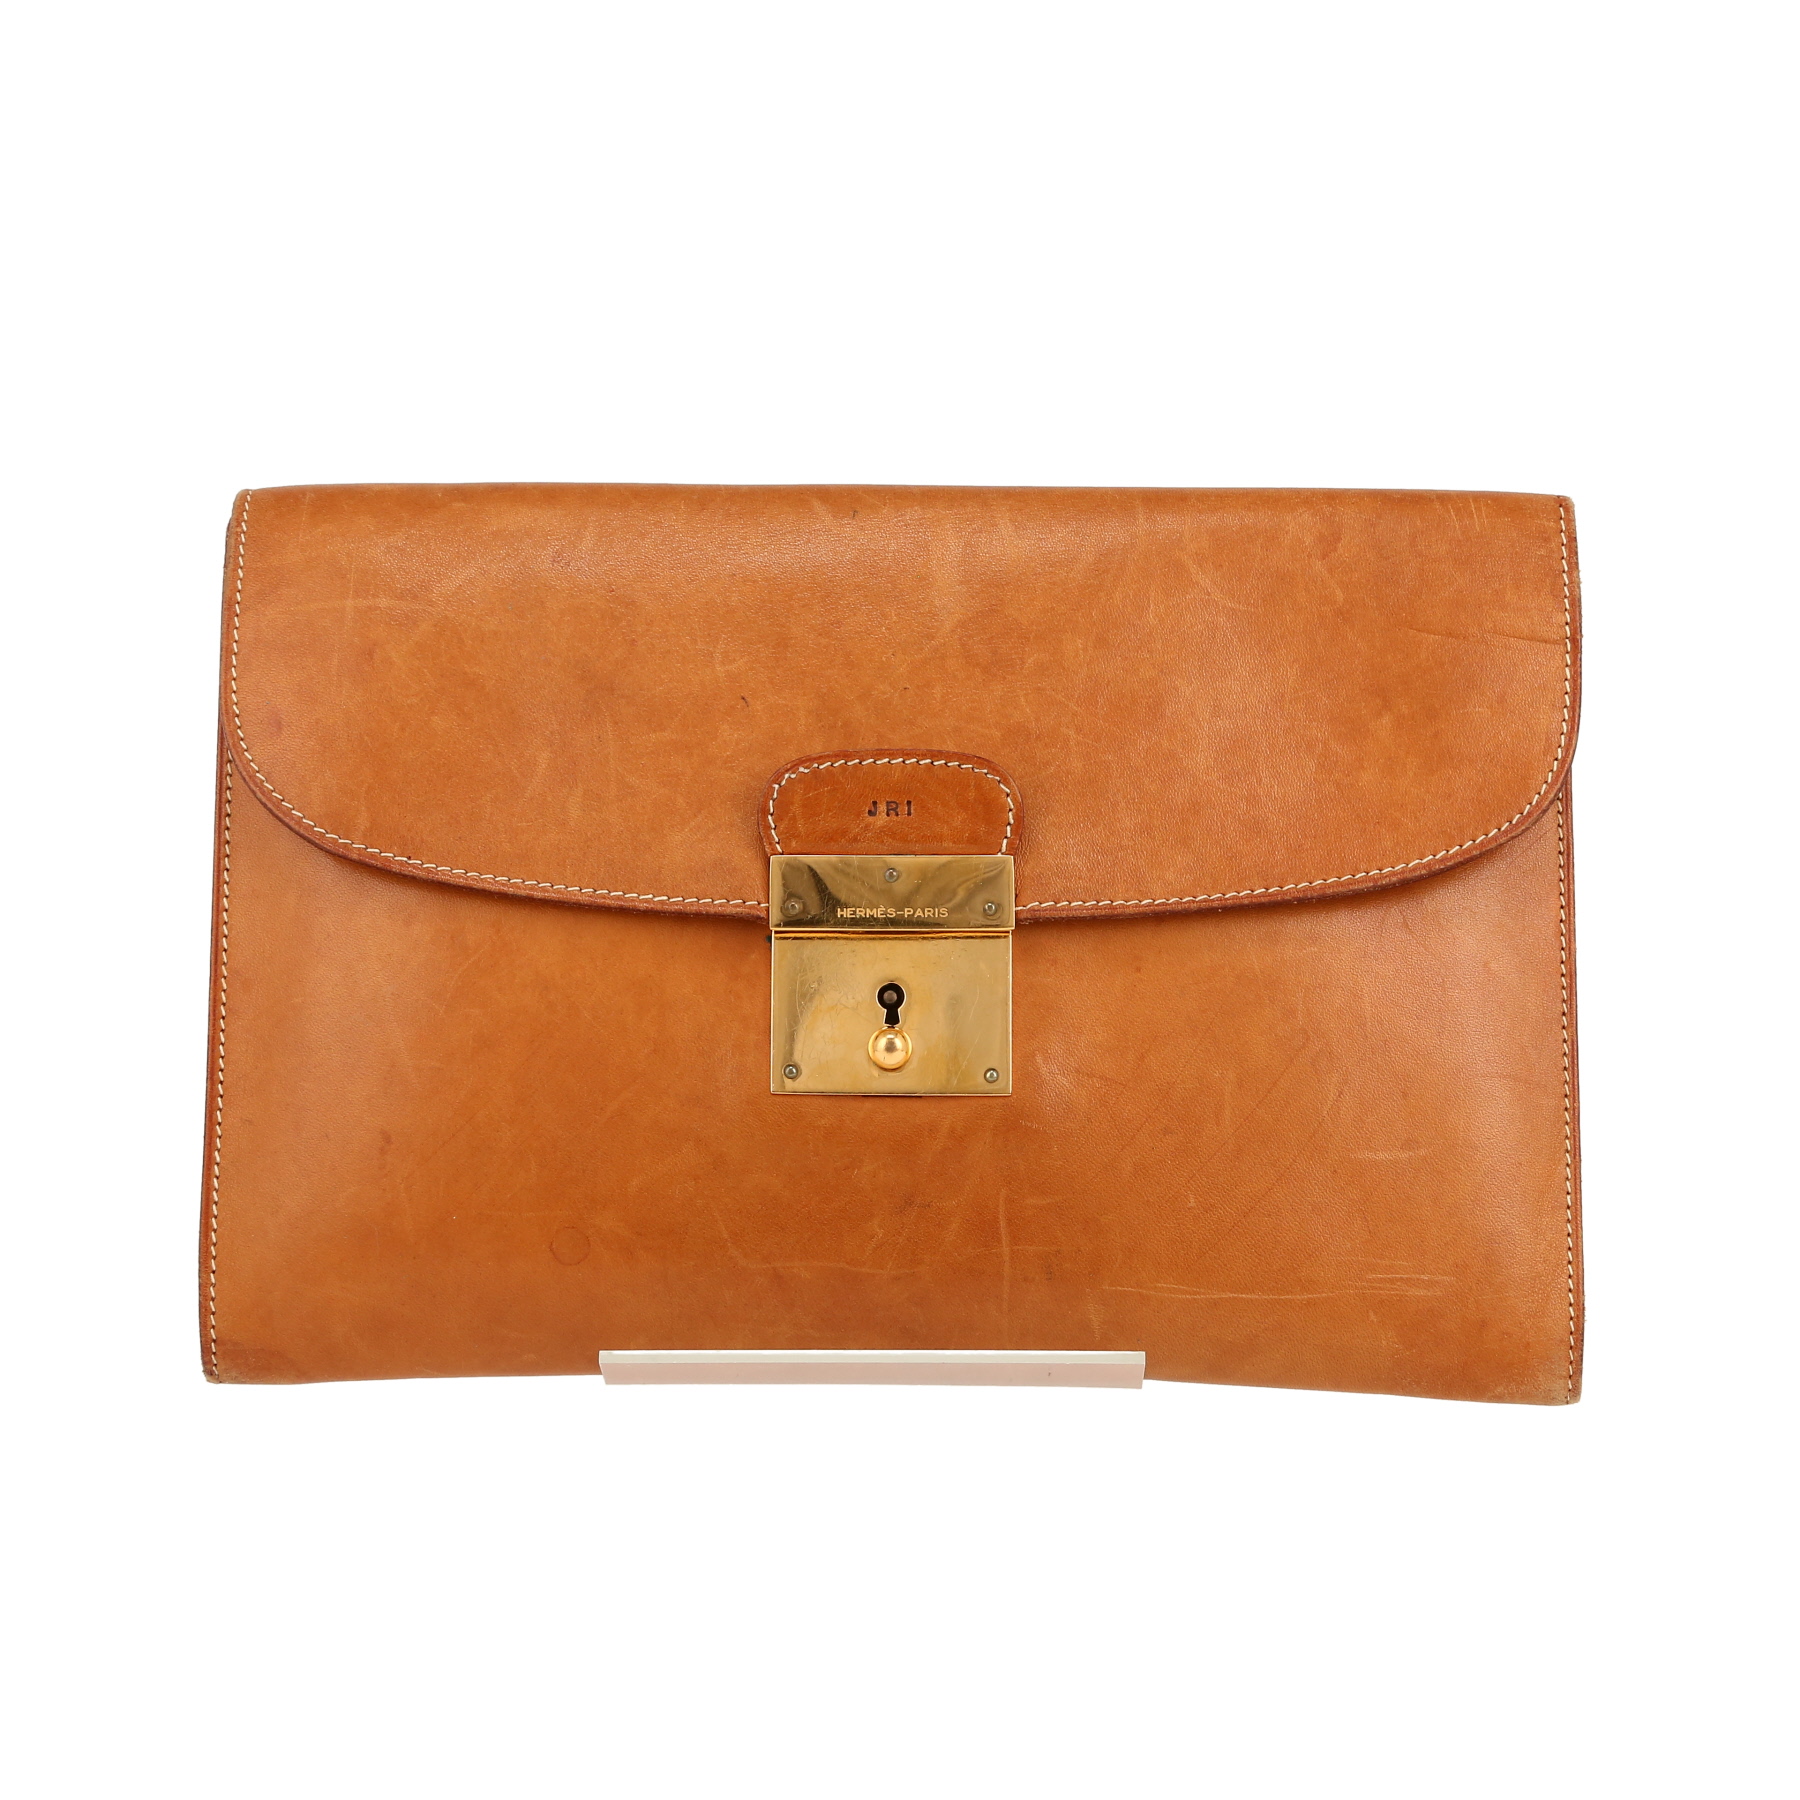 Jet Pouch In Natural Leather